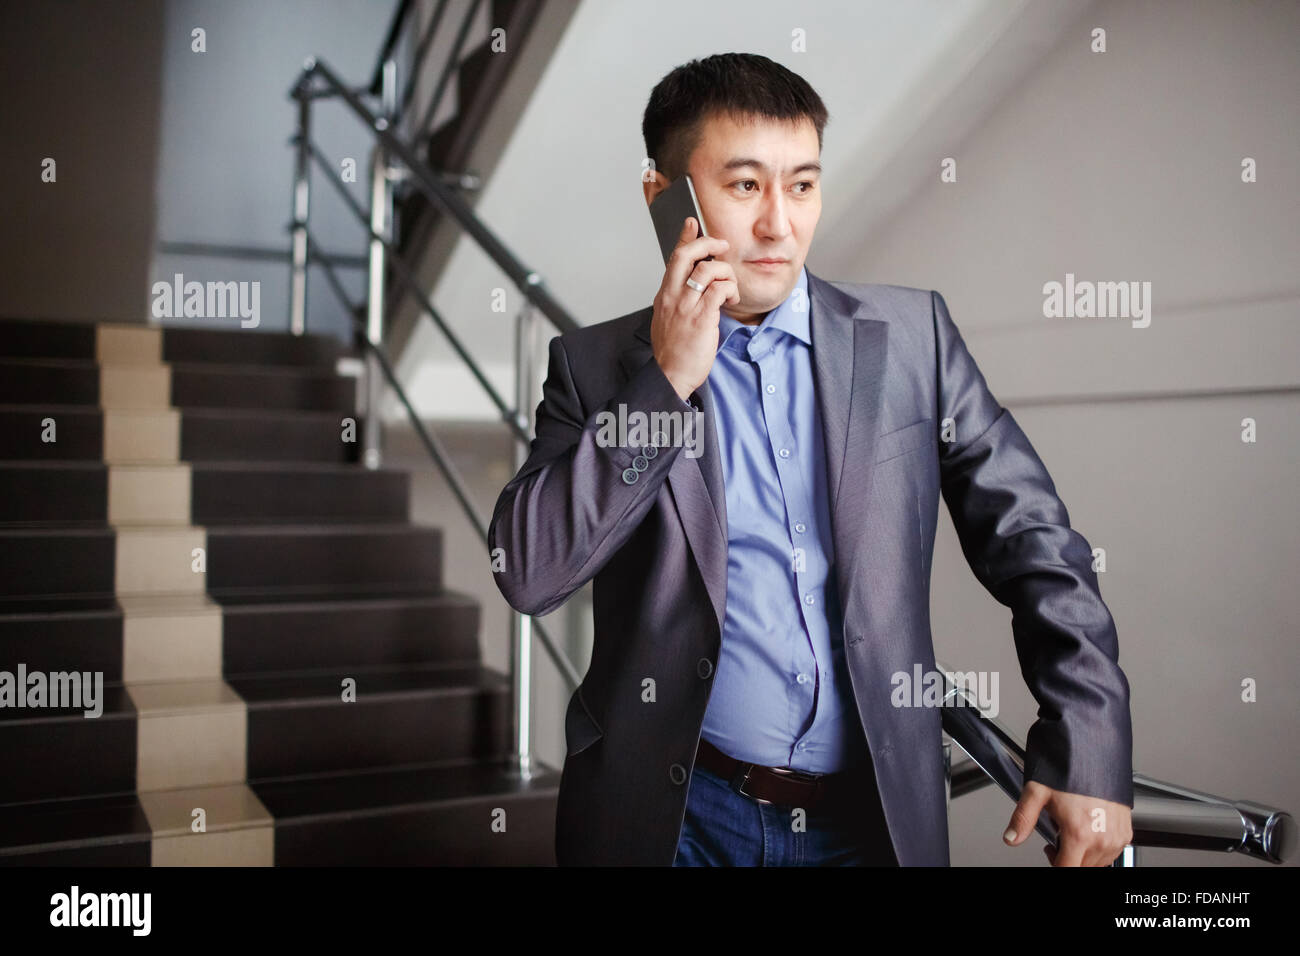 Businessman with phone in his hand makes call while on stairs at office building during break, wearing suit. Business Portrait of a male mid-asian appearance. Stock Photo